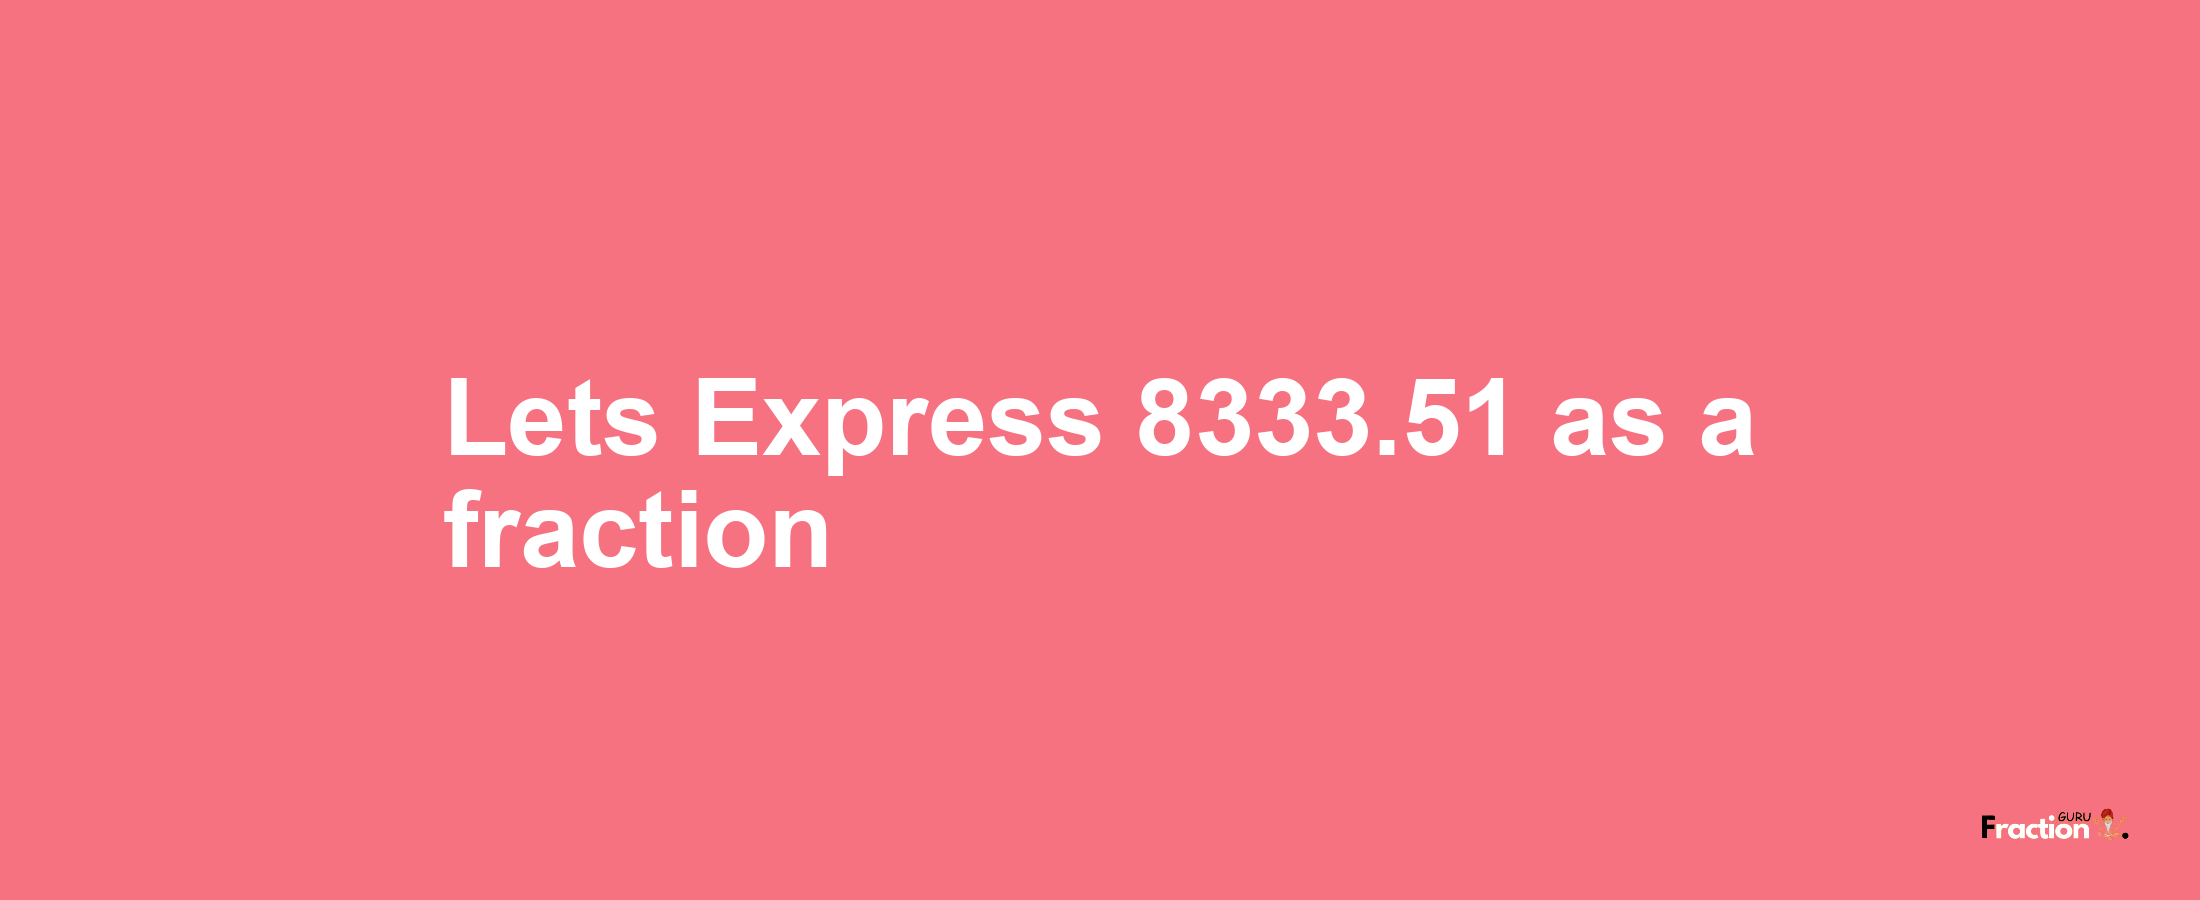 Lets Express 8333.51 as afraction